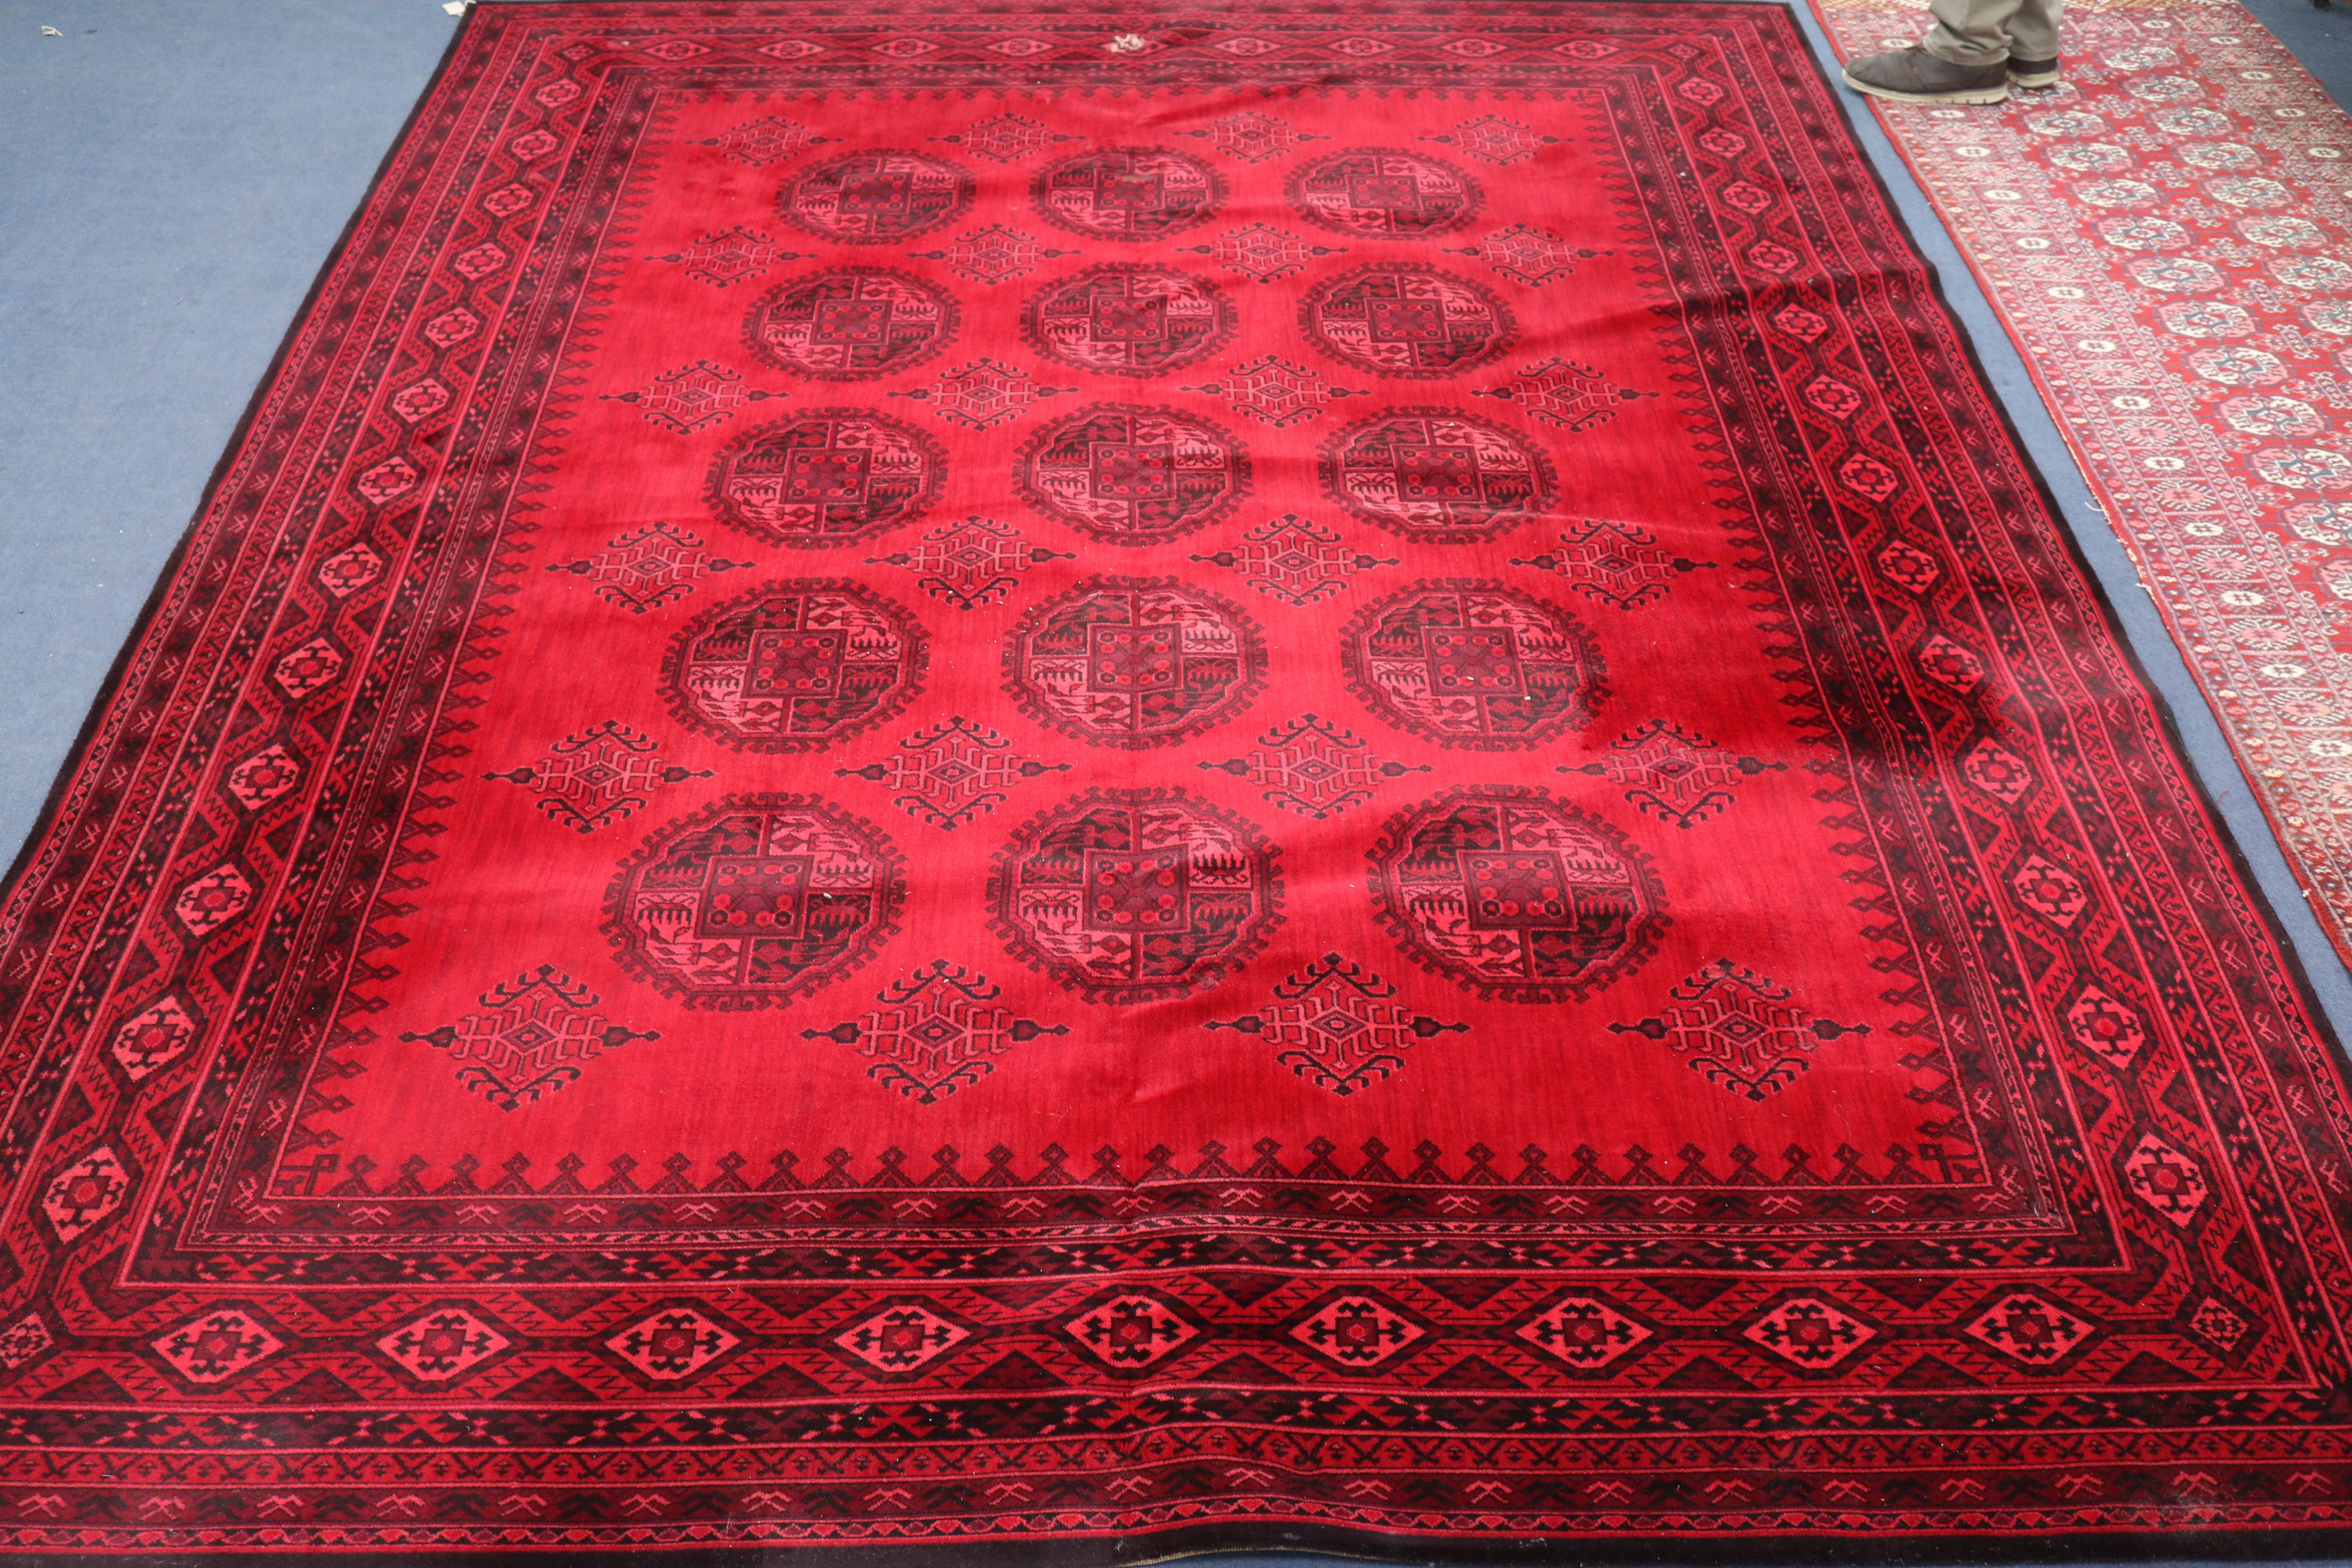 A Bokhara red ground carpet (worn) 366 by 276cm